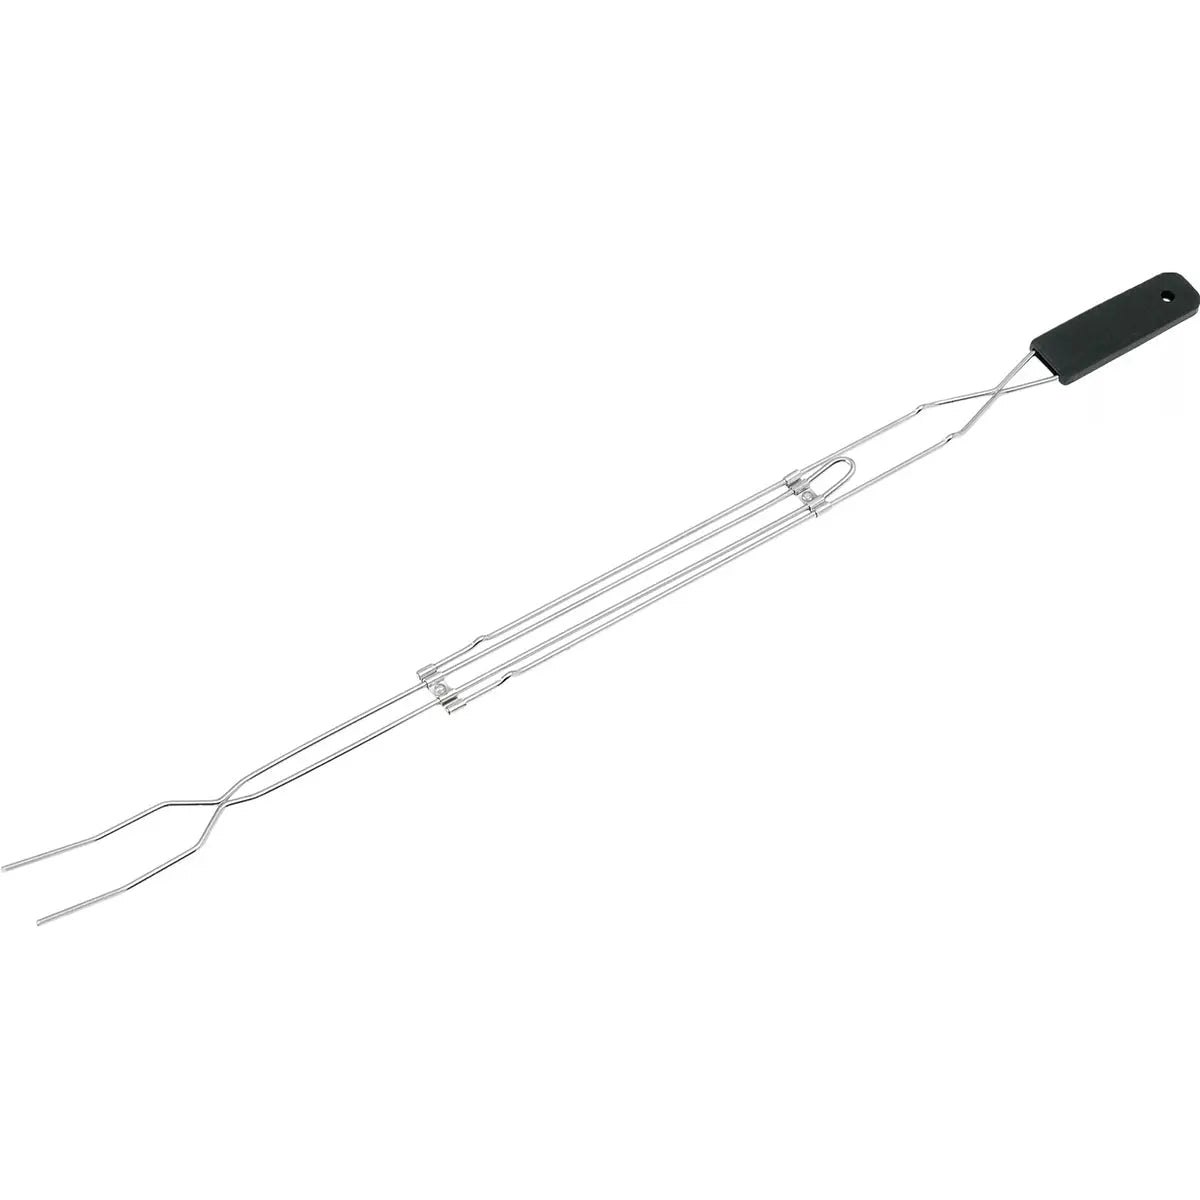 Coghlan's Extension Fork, Telescoping Handle Extends to 30", For Camping Cooking Coghlan's